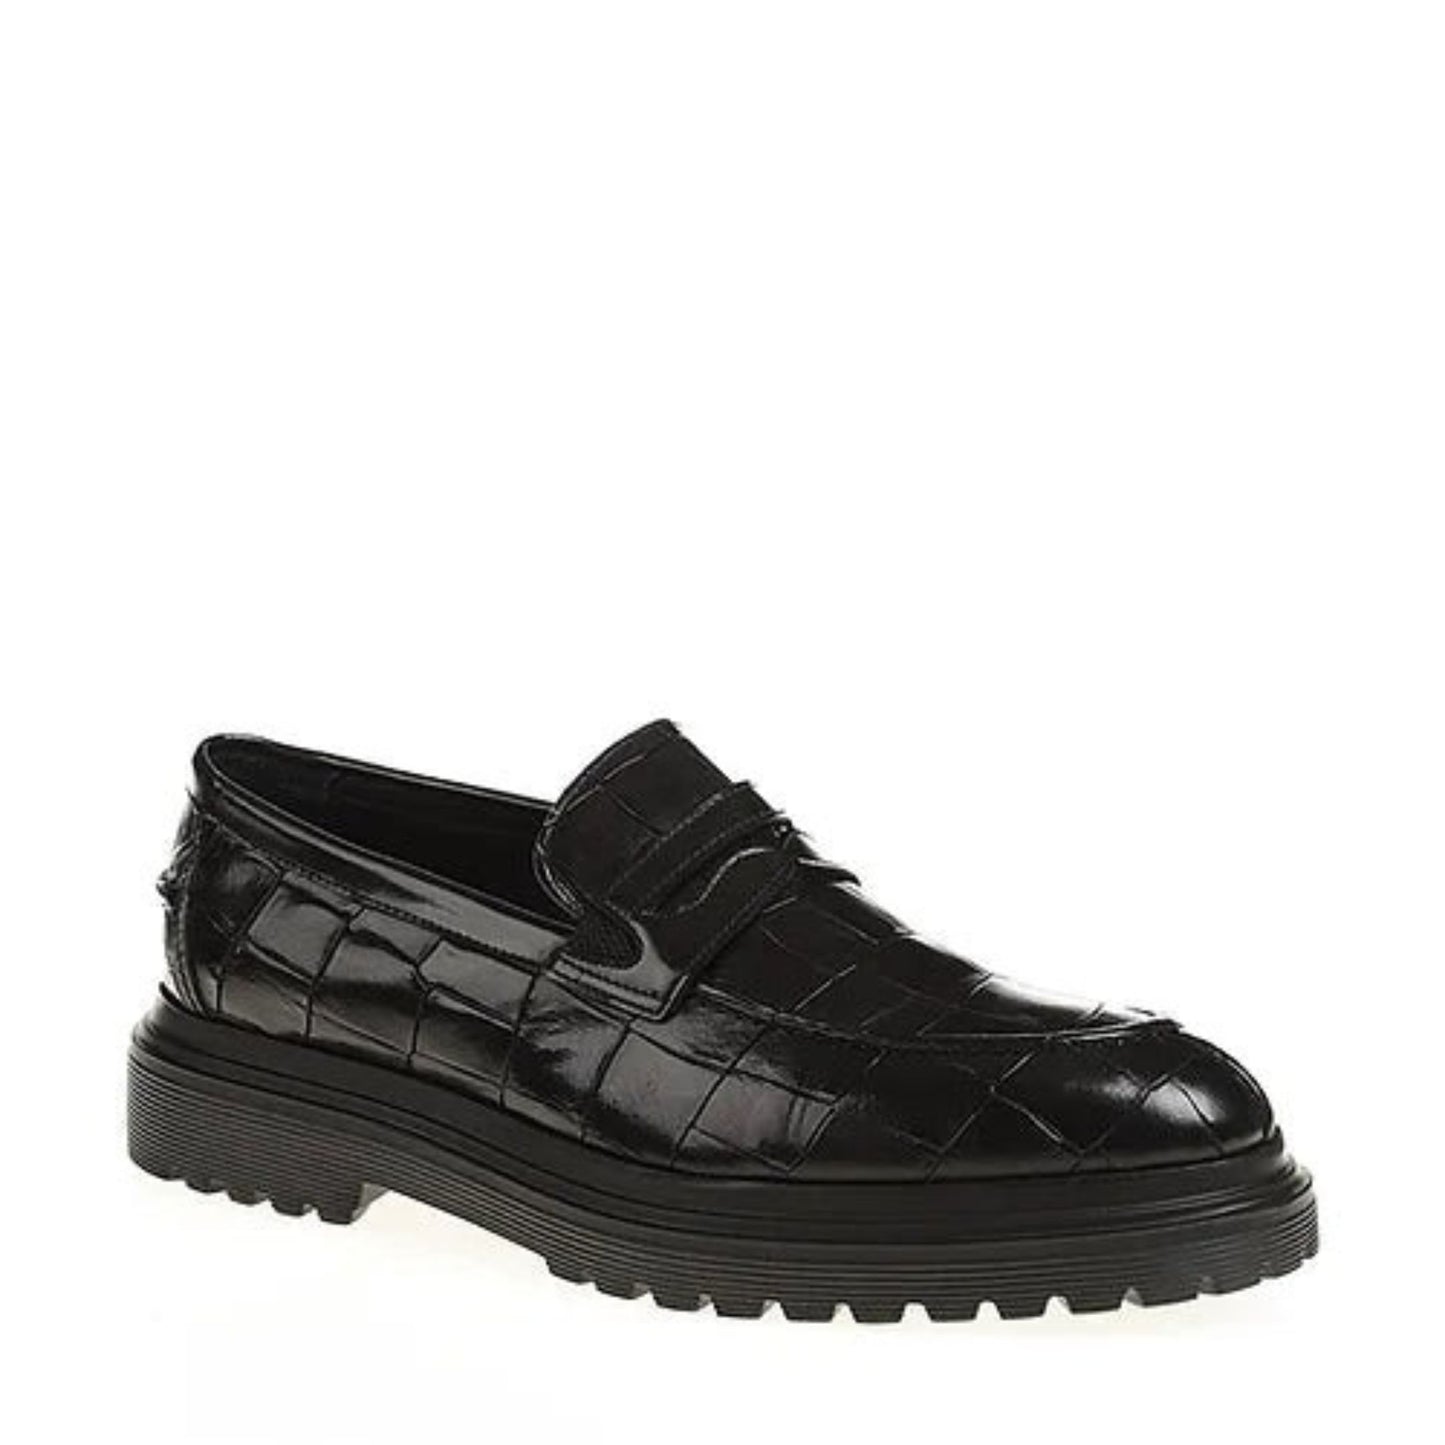 Madasat Black Leather Casual Shoes - 385 |